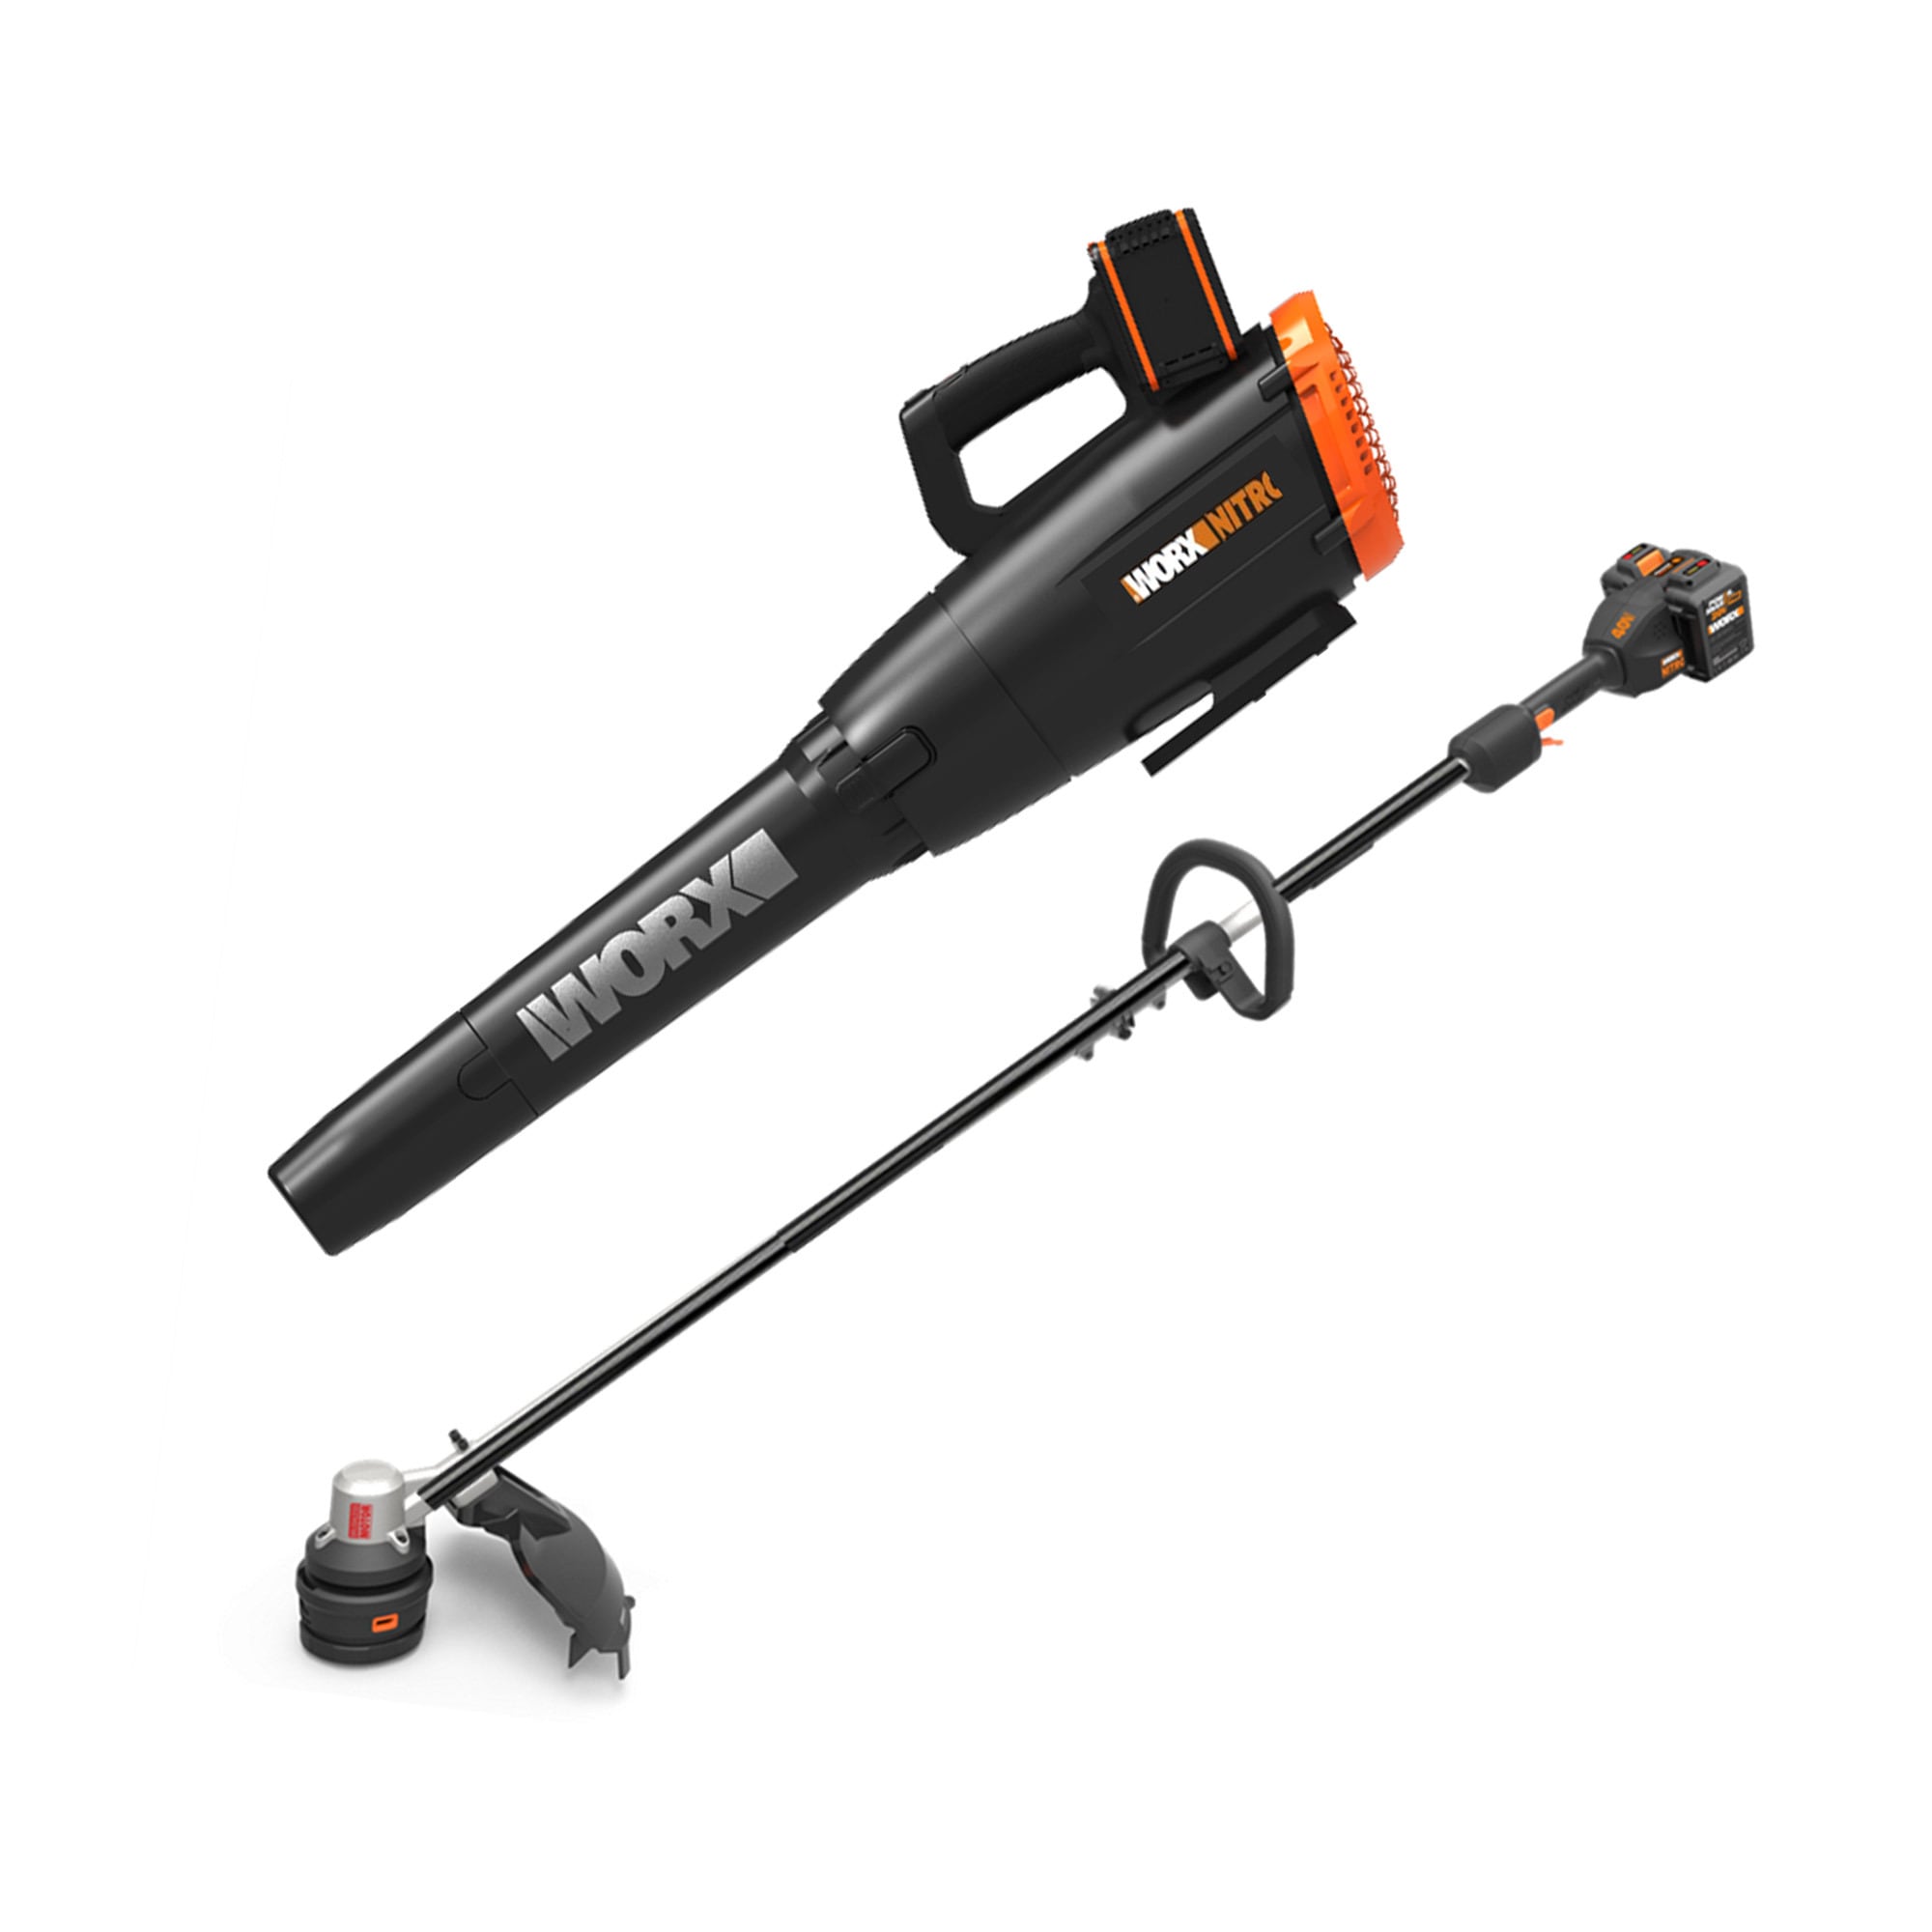 Worx Nitro Power Share 40-Volt 25-in Hedge Trimmer 2 Ah (Battery and Charger Included)